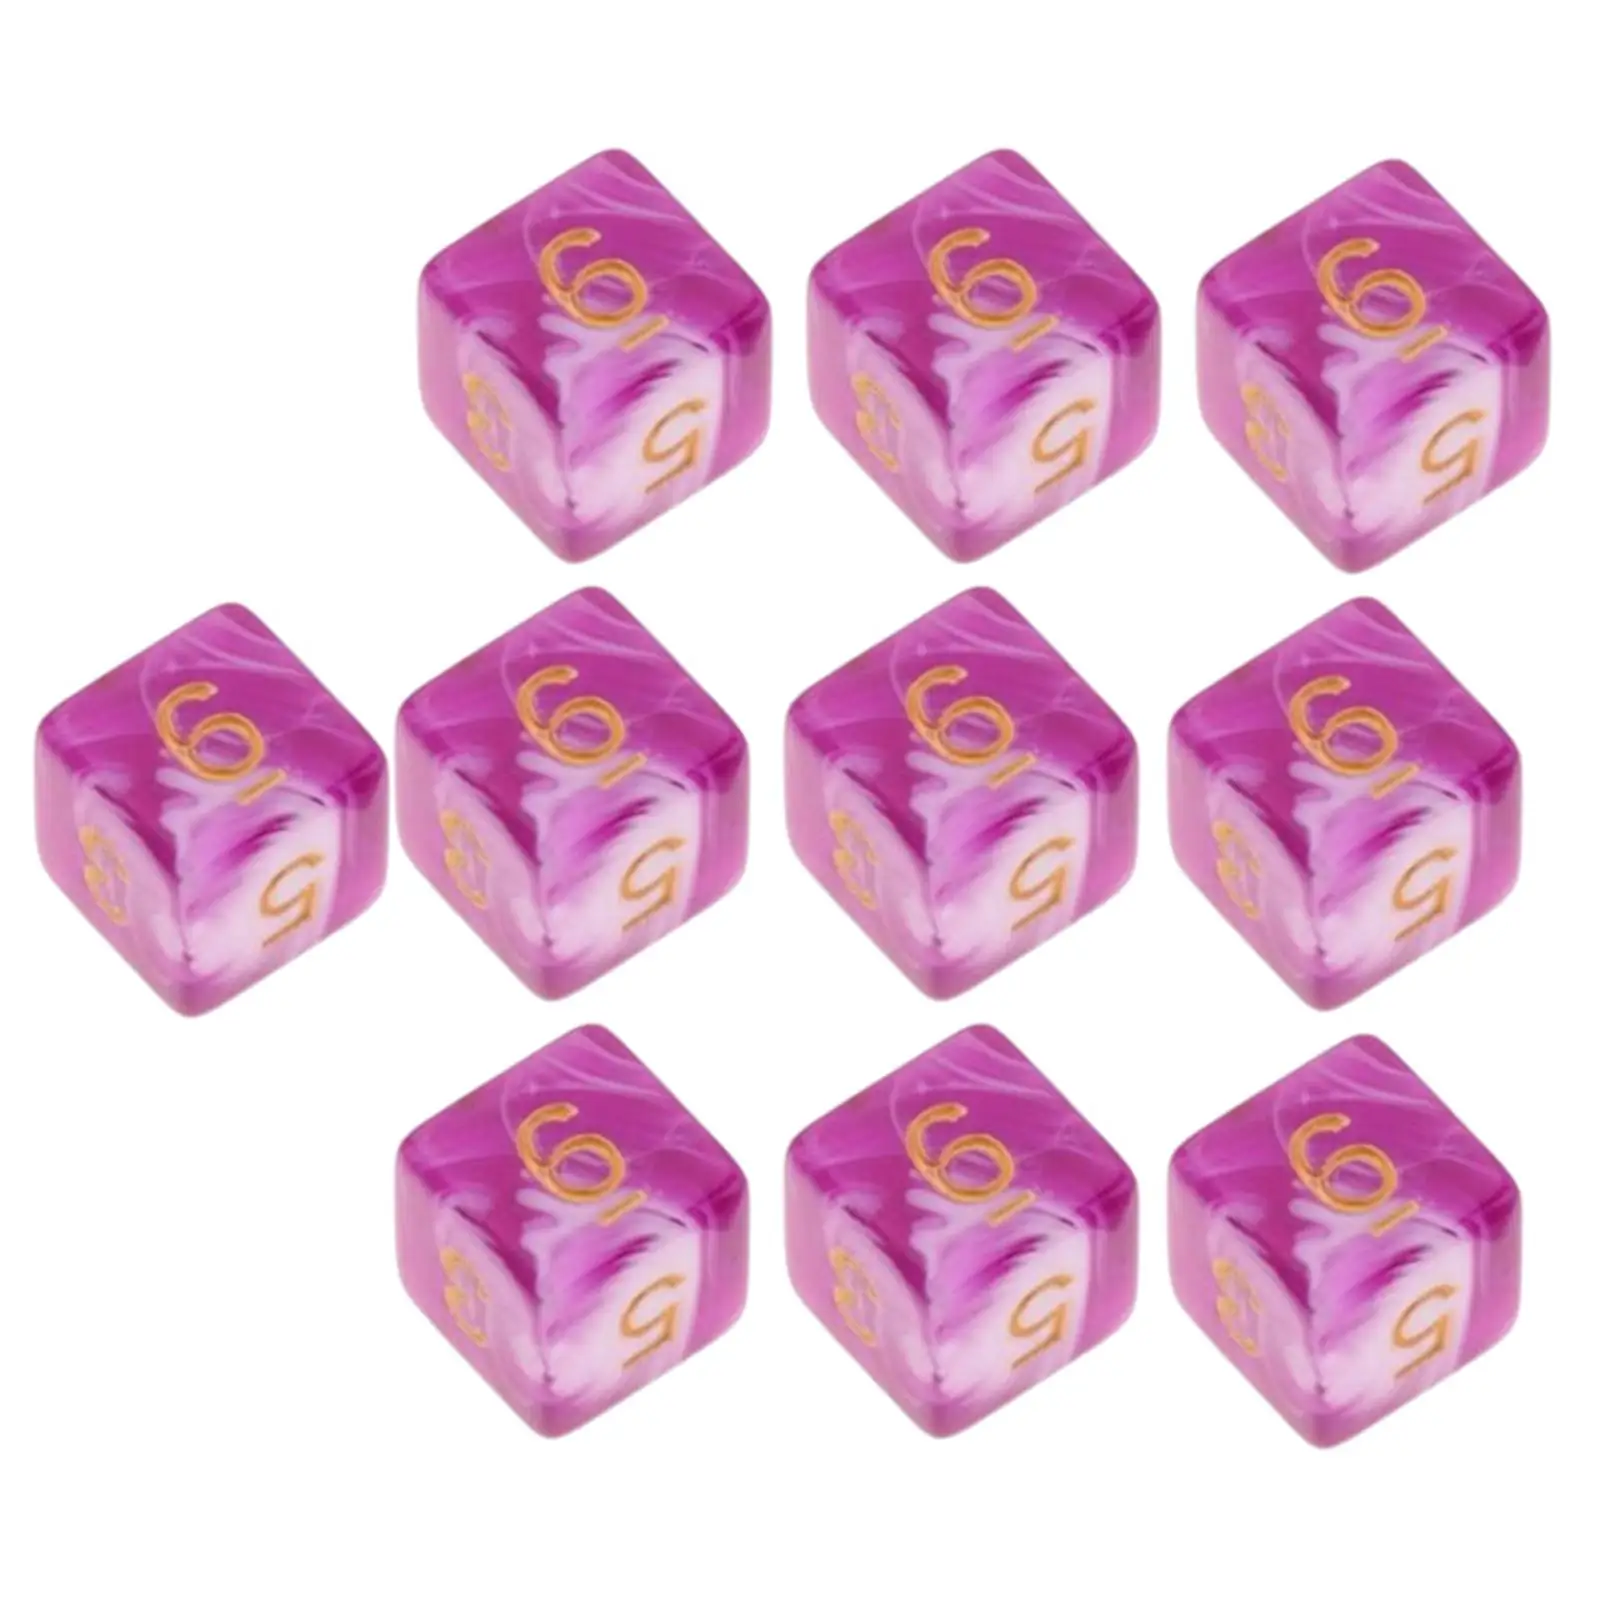 10x 6 Sides Dice Leisure Entertainment Toys Math Teaching Aids Game Dice for Board Party Table Roll Playing Game